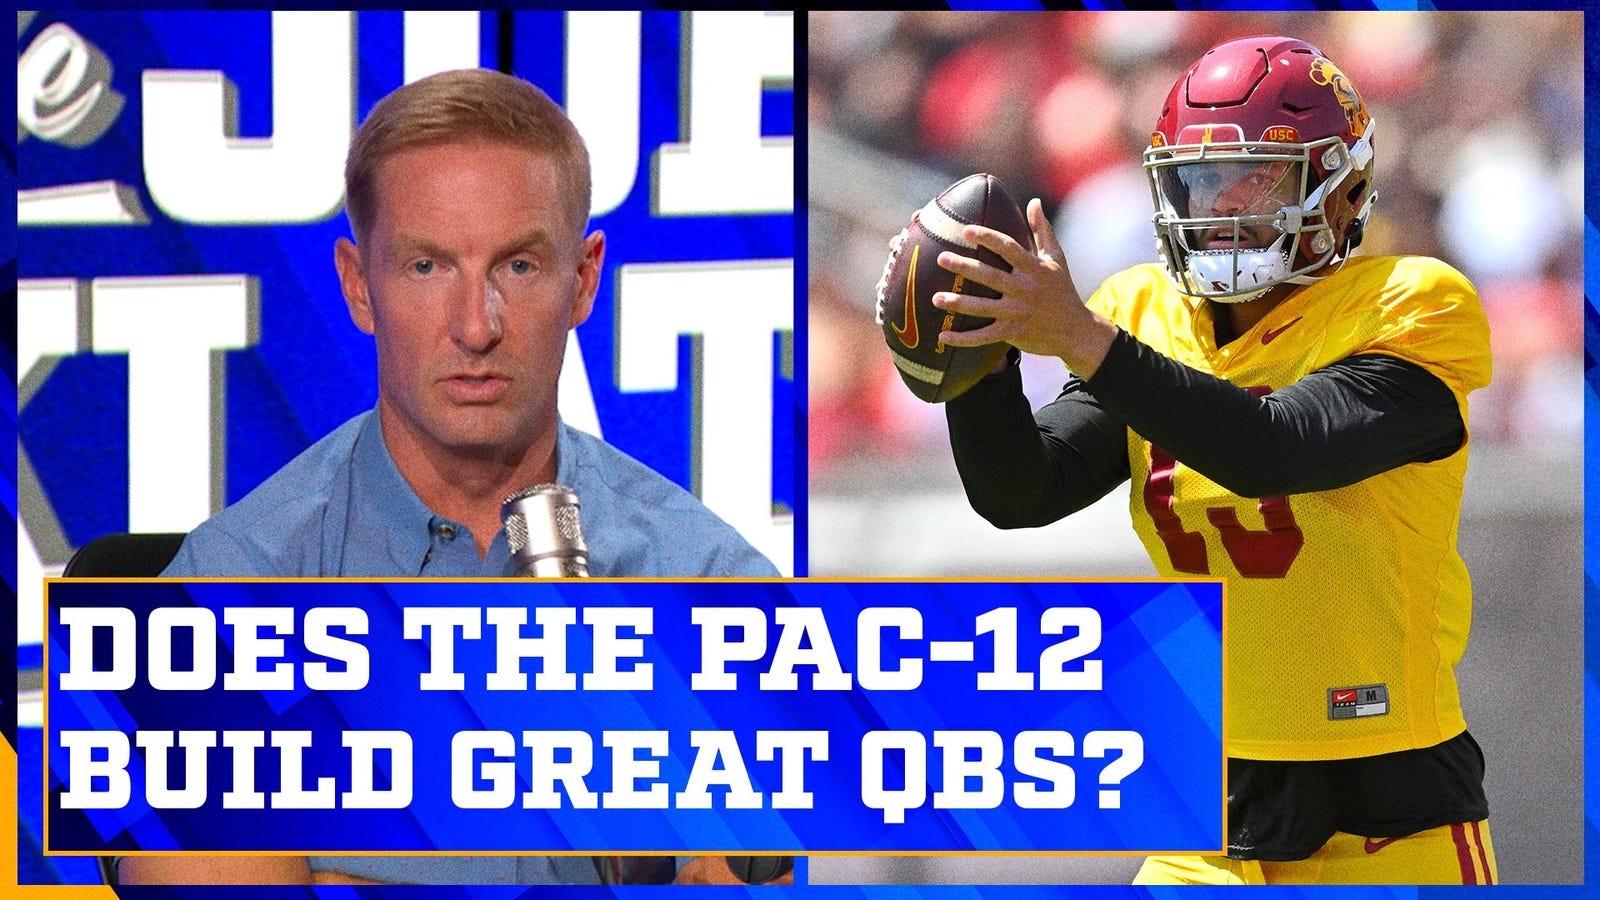 Is the Pac-12 the best QB conference in the country? 